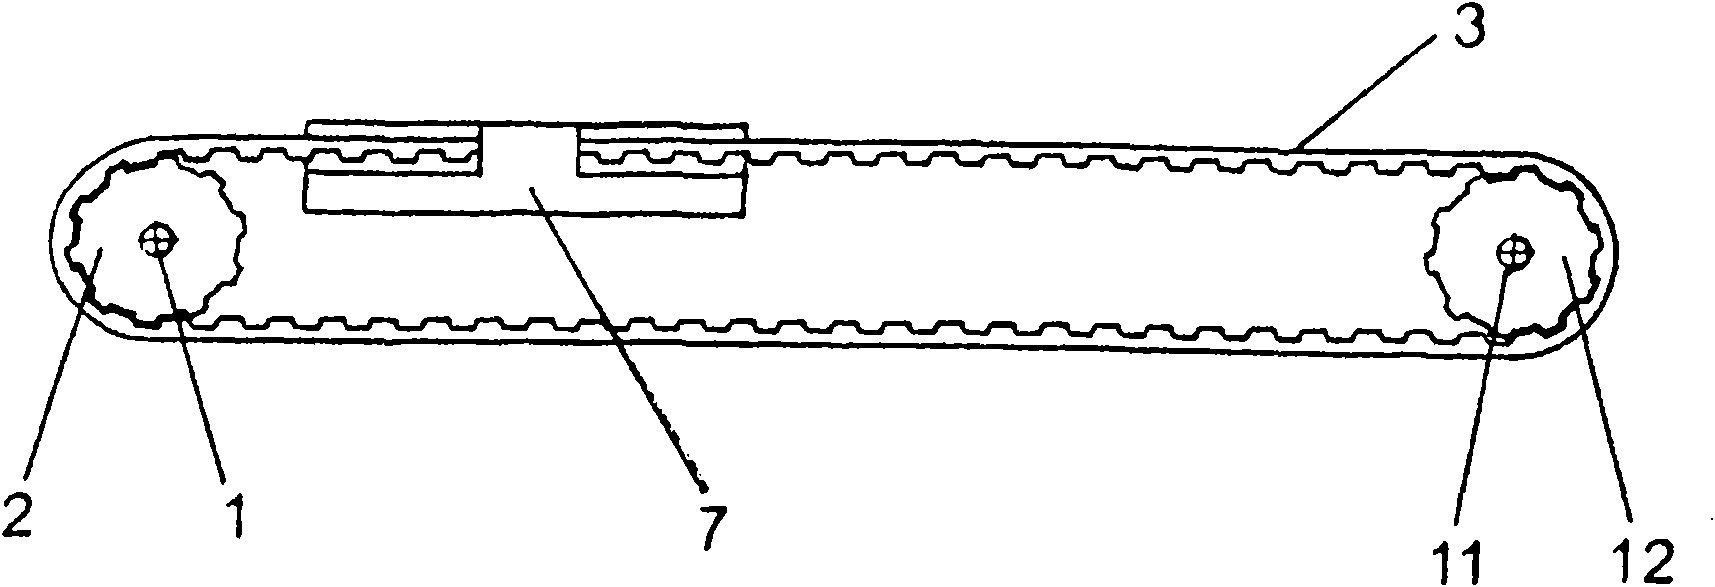 Apparatus for converting rotary motion into linear motion